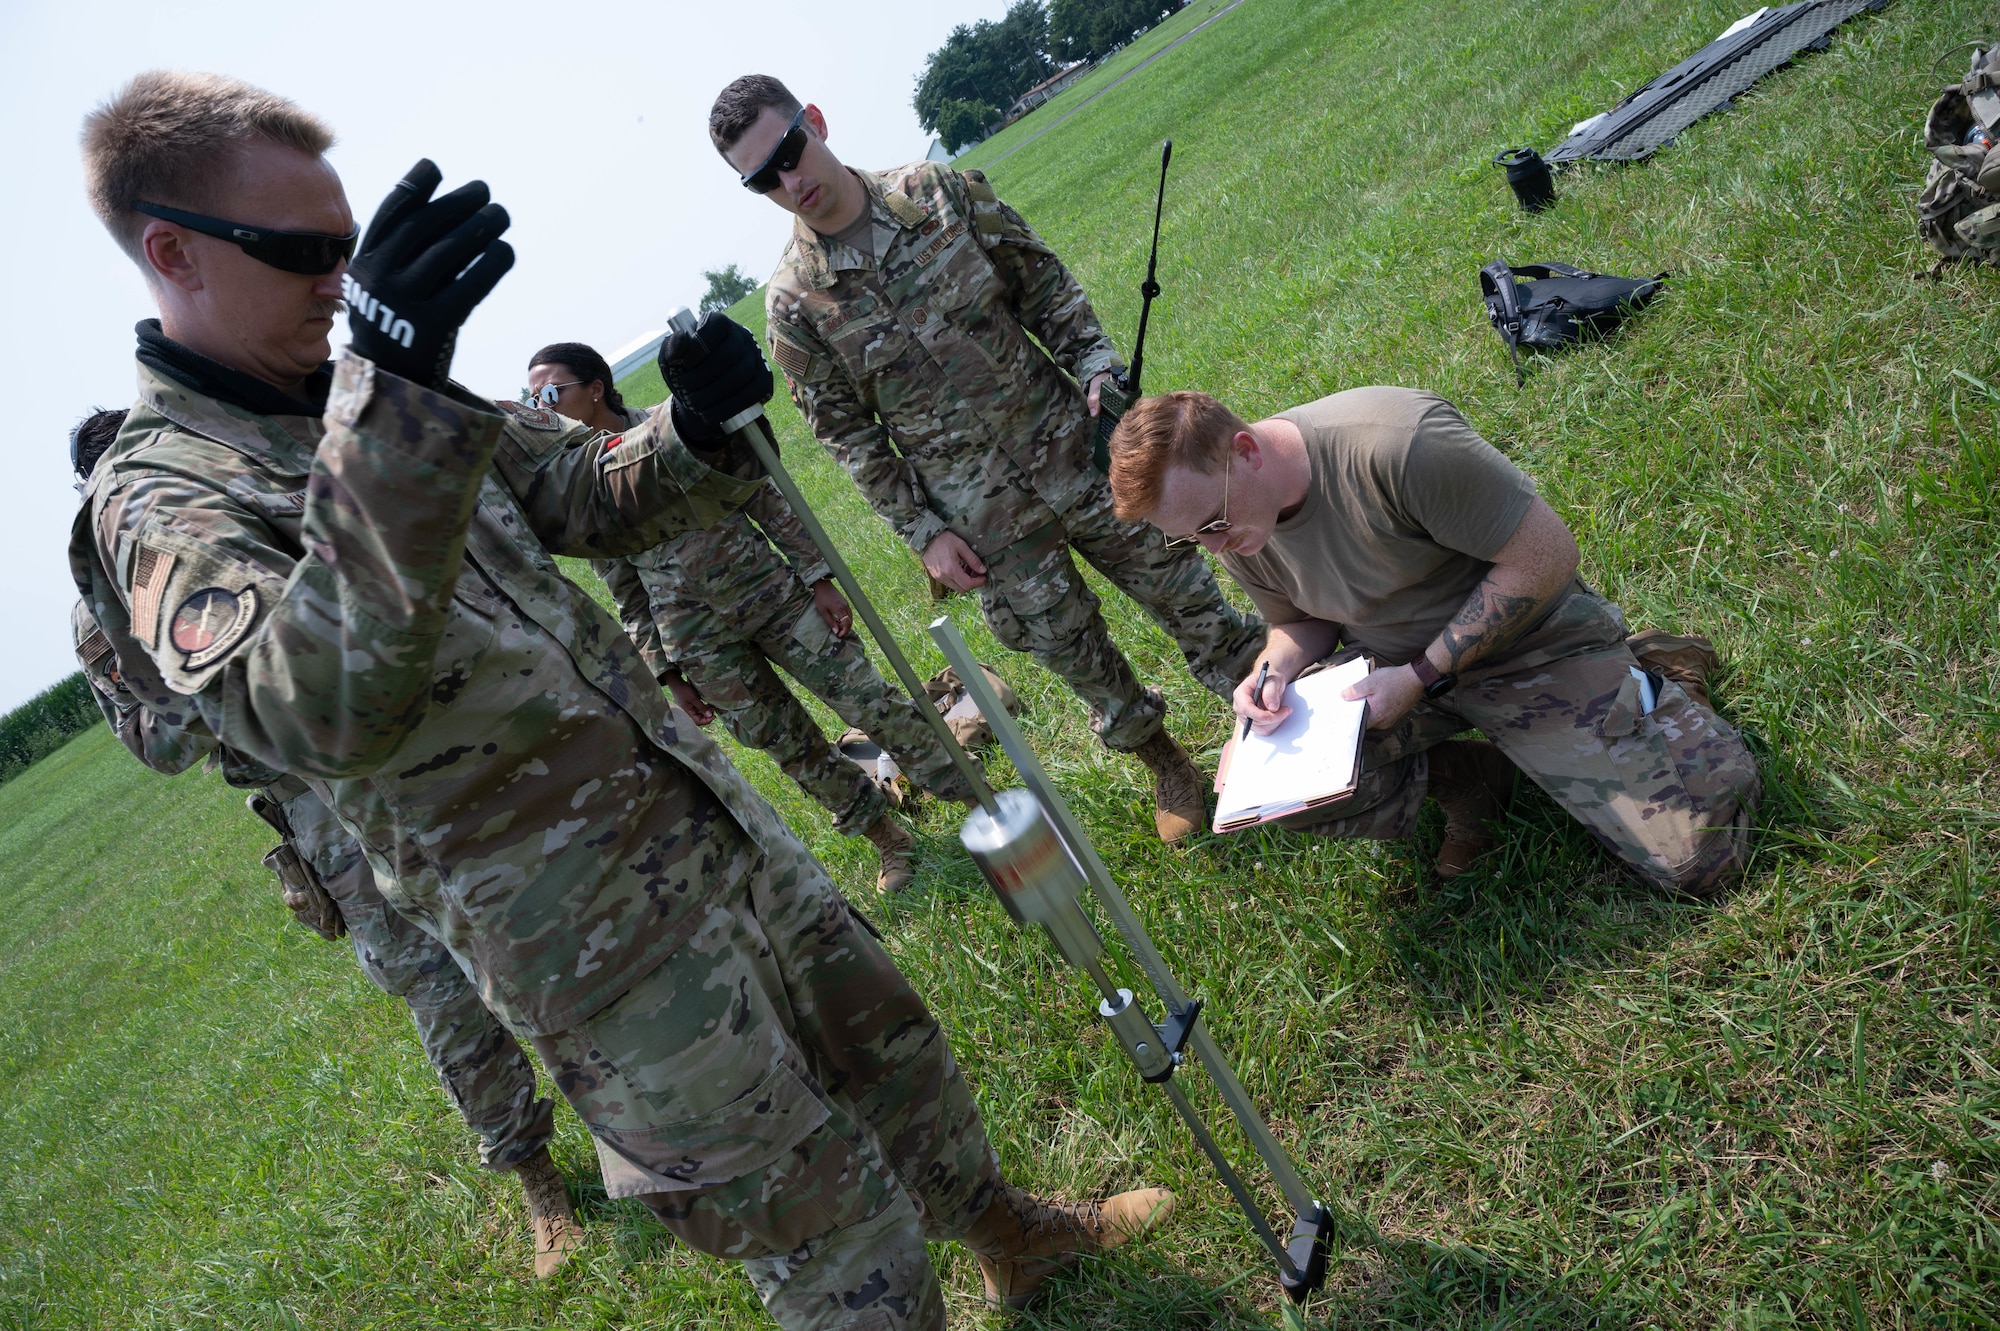 U.S. Air Force Tech. Sgt. James King III and Staff Sgt. Corbin Simonsen, Landing Zone Operations Course students, test the strength of the soil at a simulated landing zone using a dynamic cone penetrometer at Schafer Field in St. Jacob, Illinois, July 30, 2021. As part of the Landing Zone Operations Course students simulate surveying a landing zone.